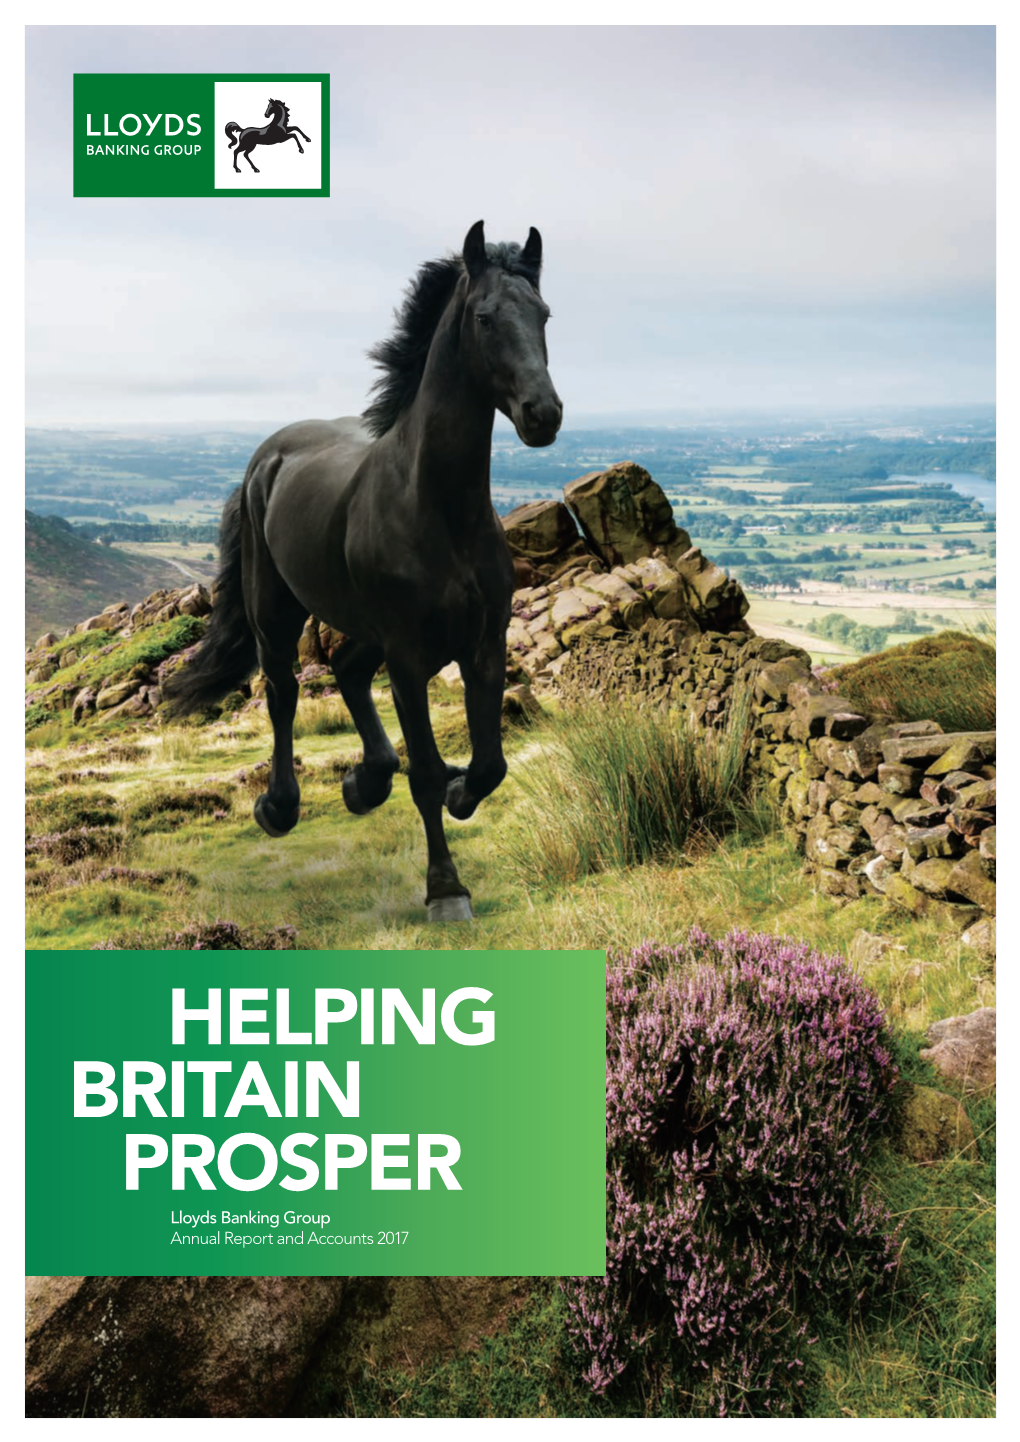 Annual Report and Accounts 2017 About Us Our Purpose Is to Help Britain Prosper